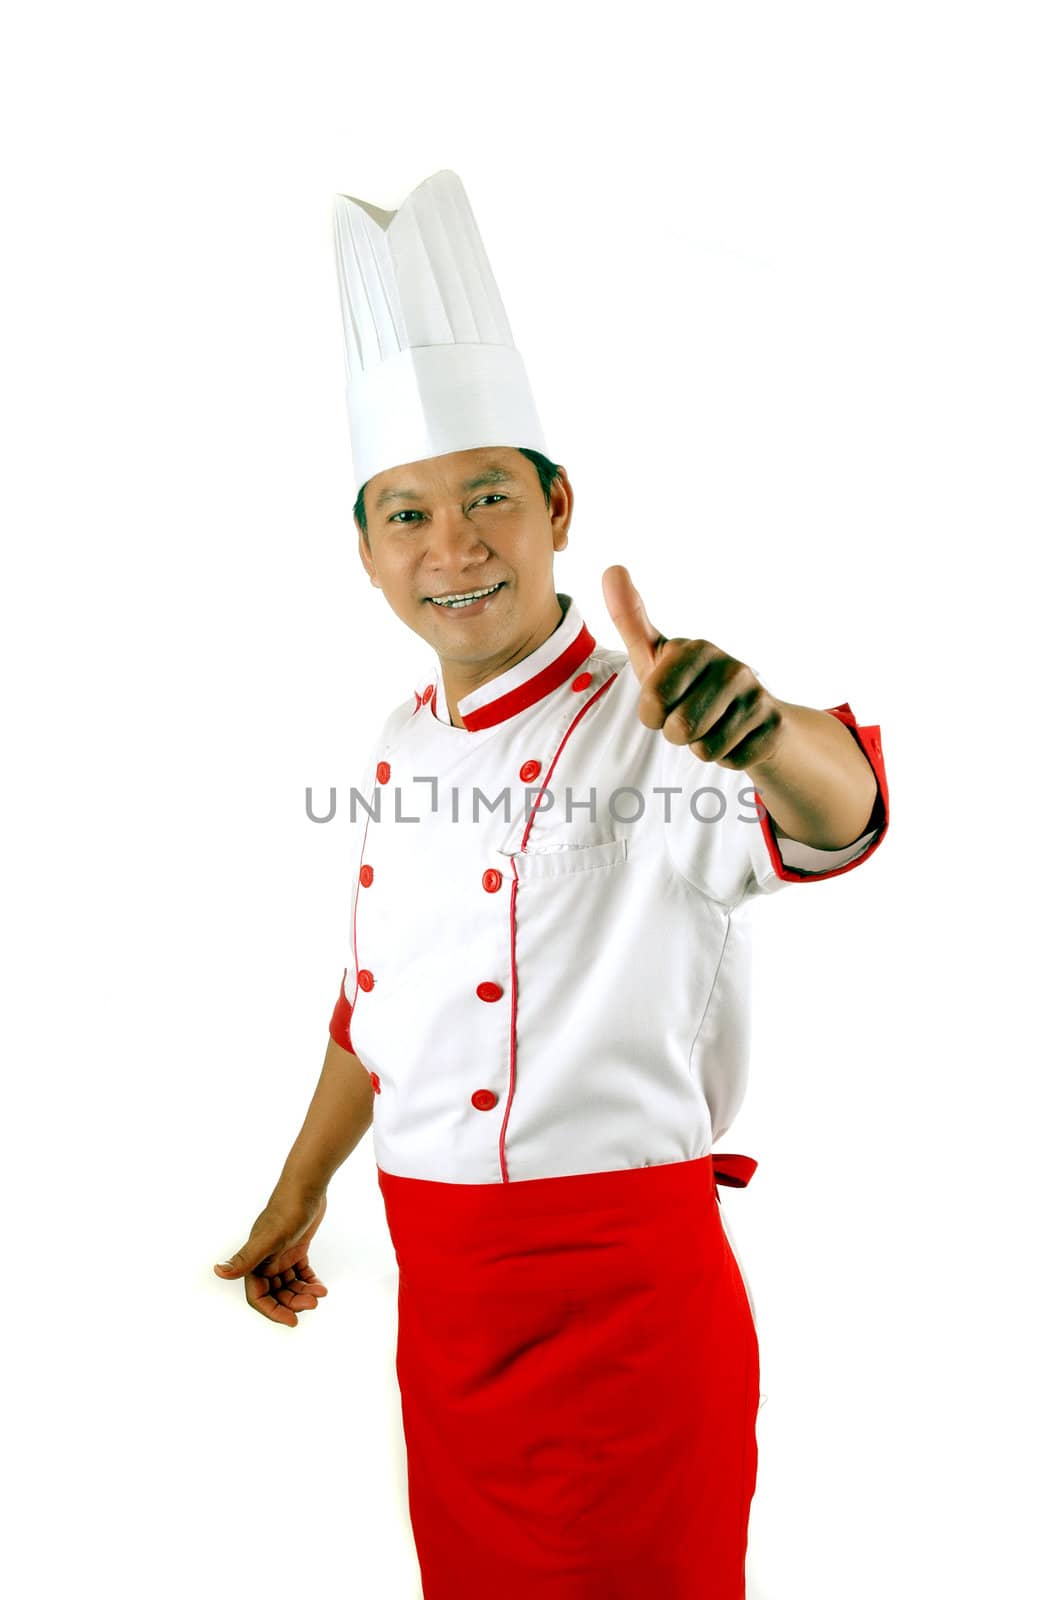 chef gives thumbs up sign by antonihalim